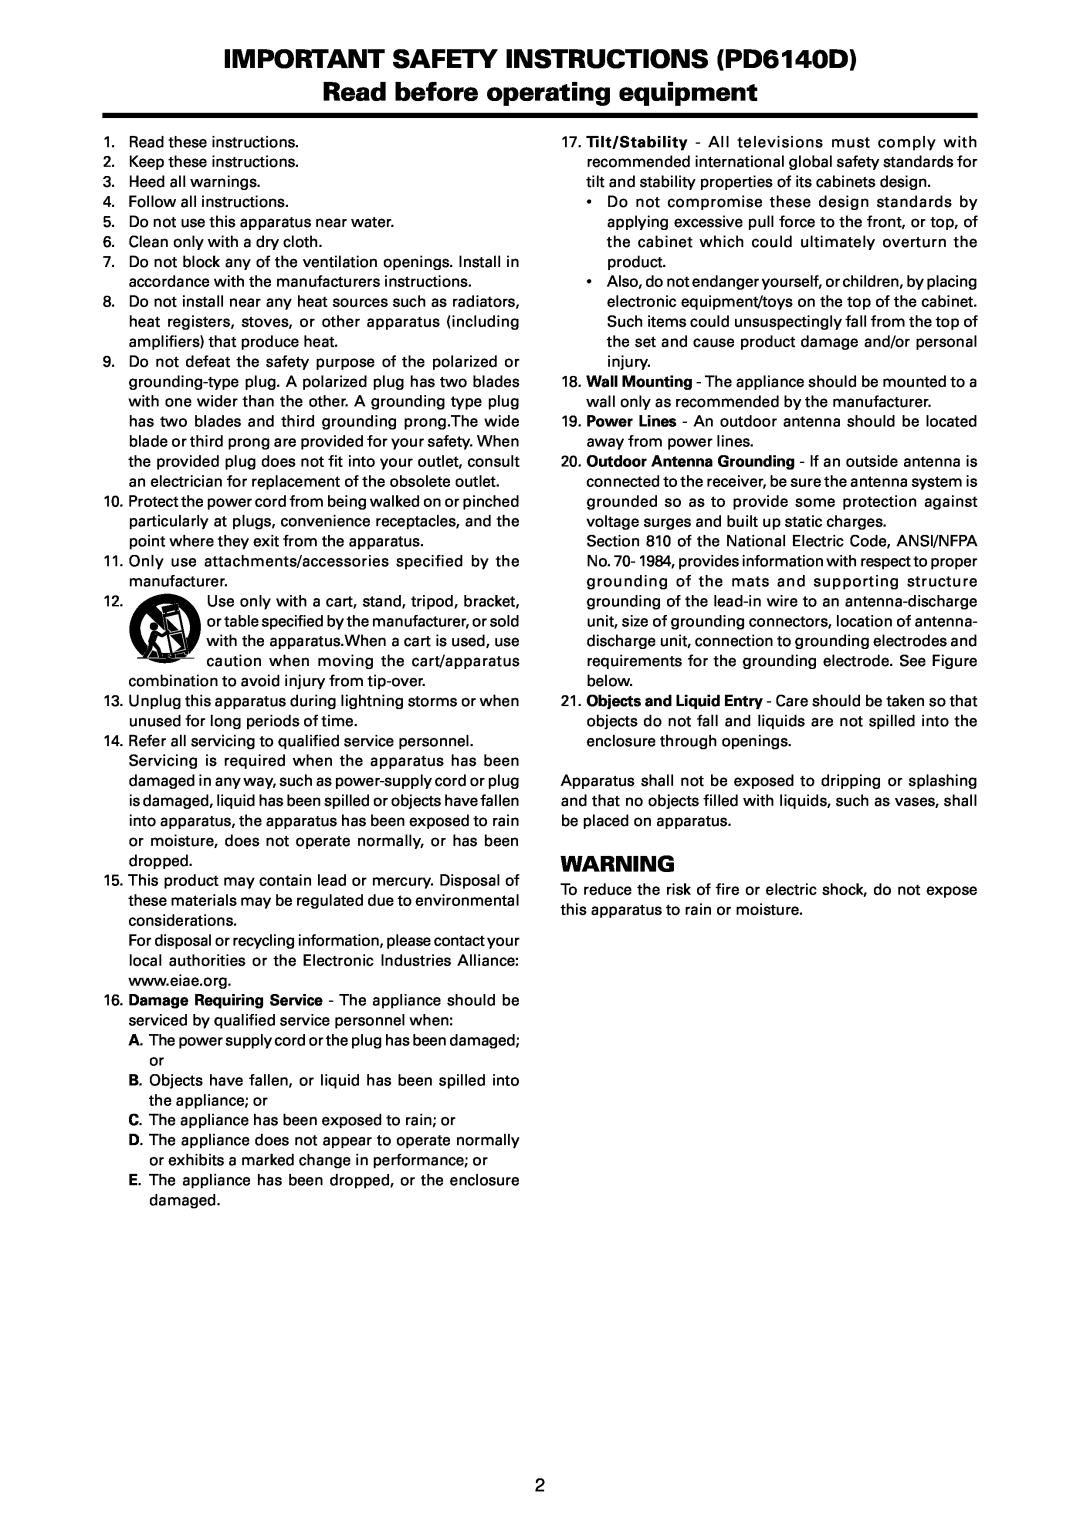 Marantz manual IMPORTANT SAFETY INSTRUCTIONS PD6140D Read before operating equipment 